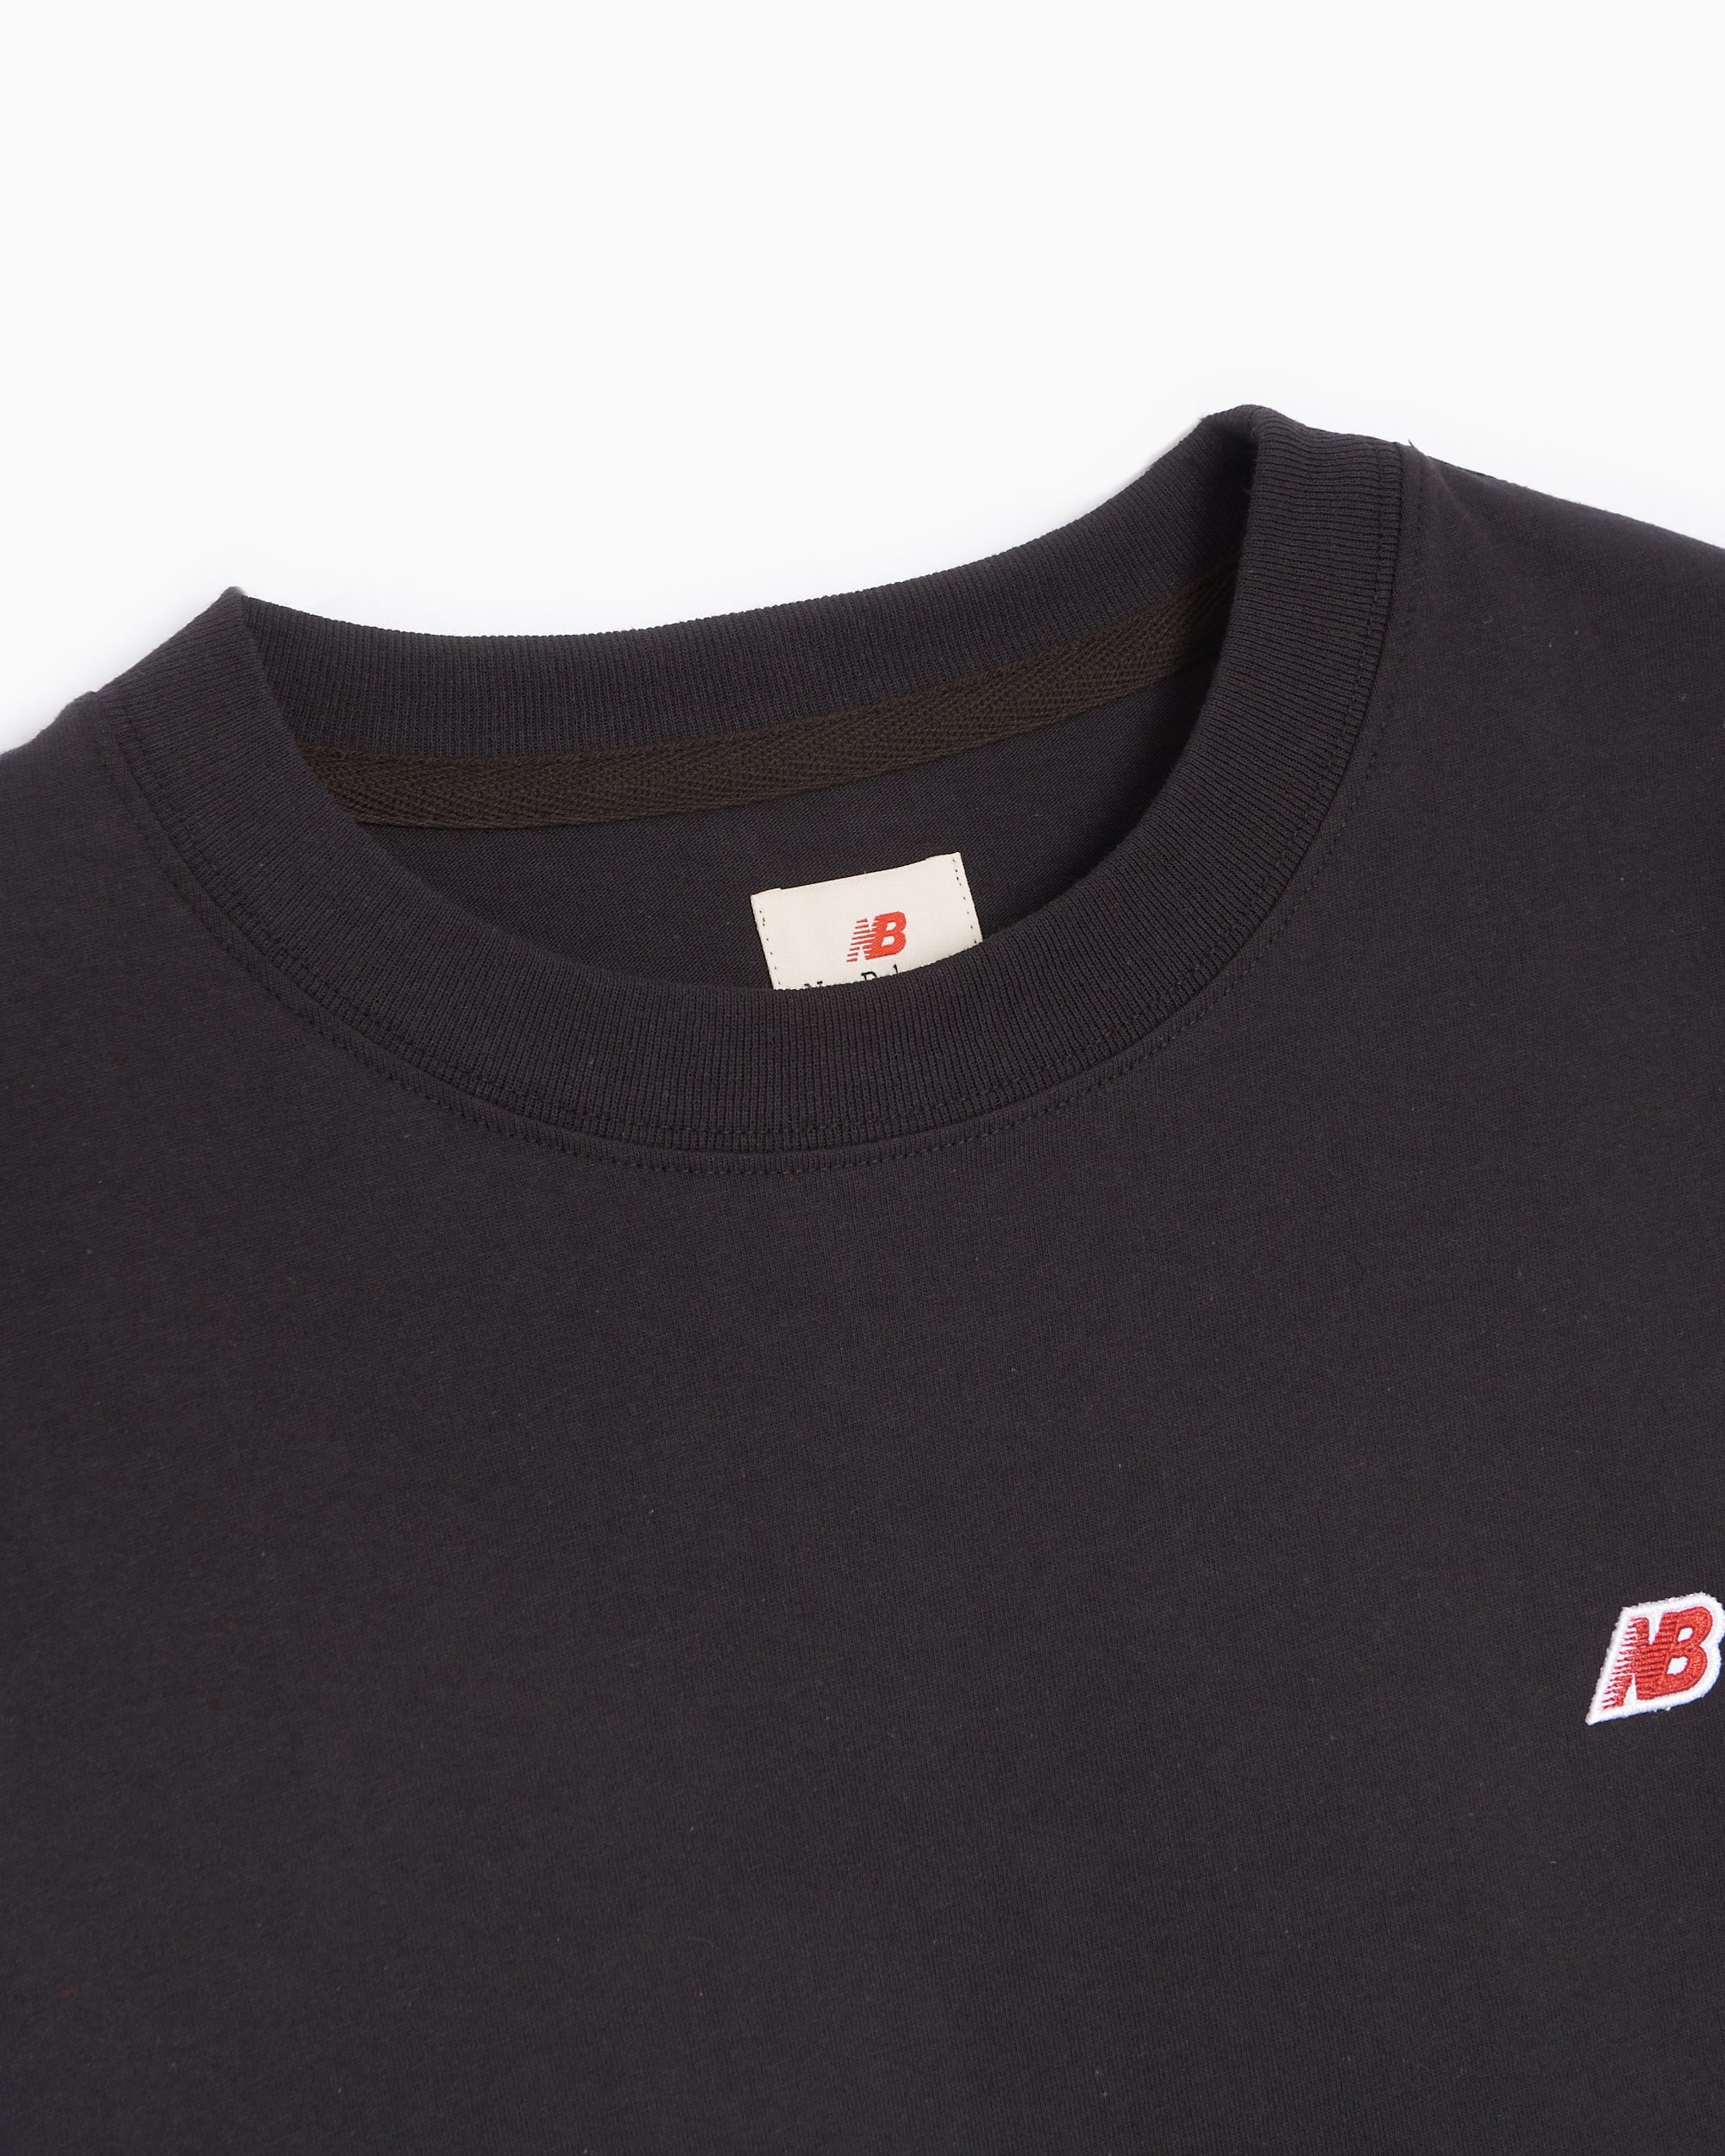 New Balance Made FOOTDISTRICT Unisex T-Shirt MT21543-BK| in USA Buy Core Online Black at